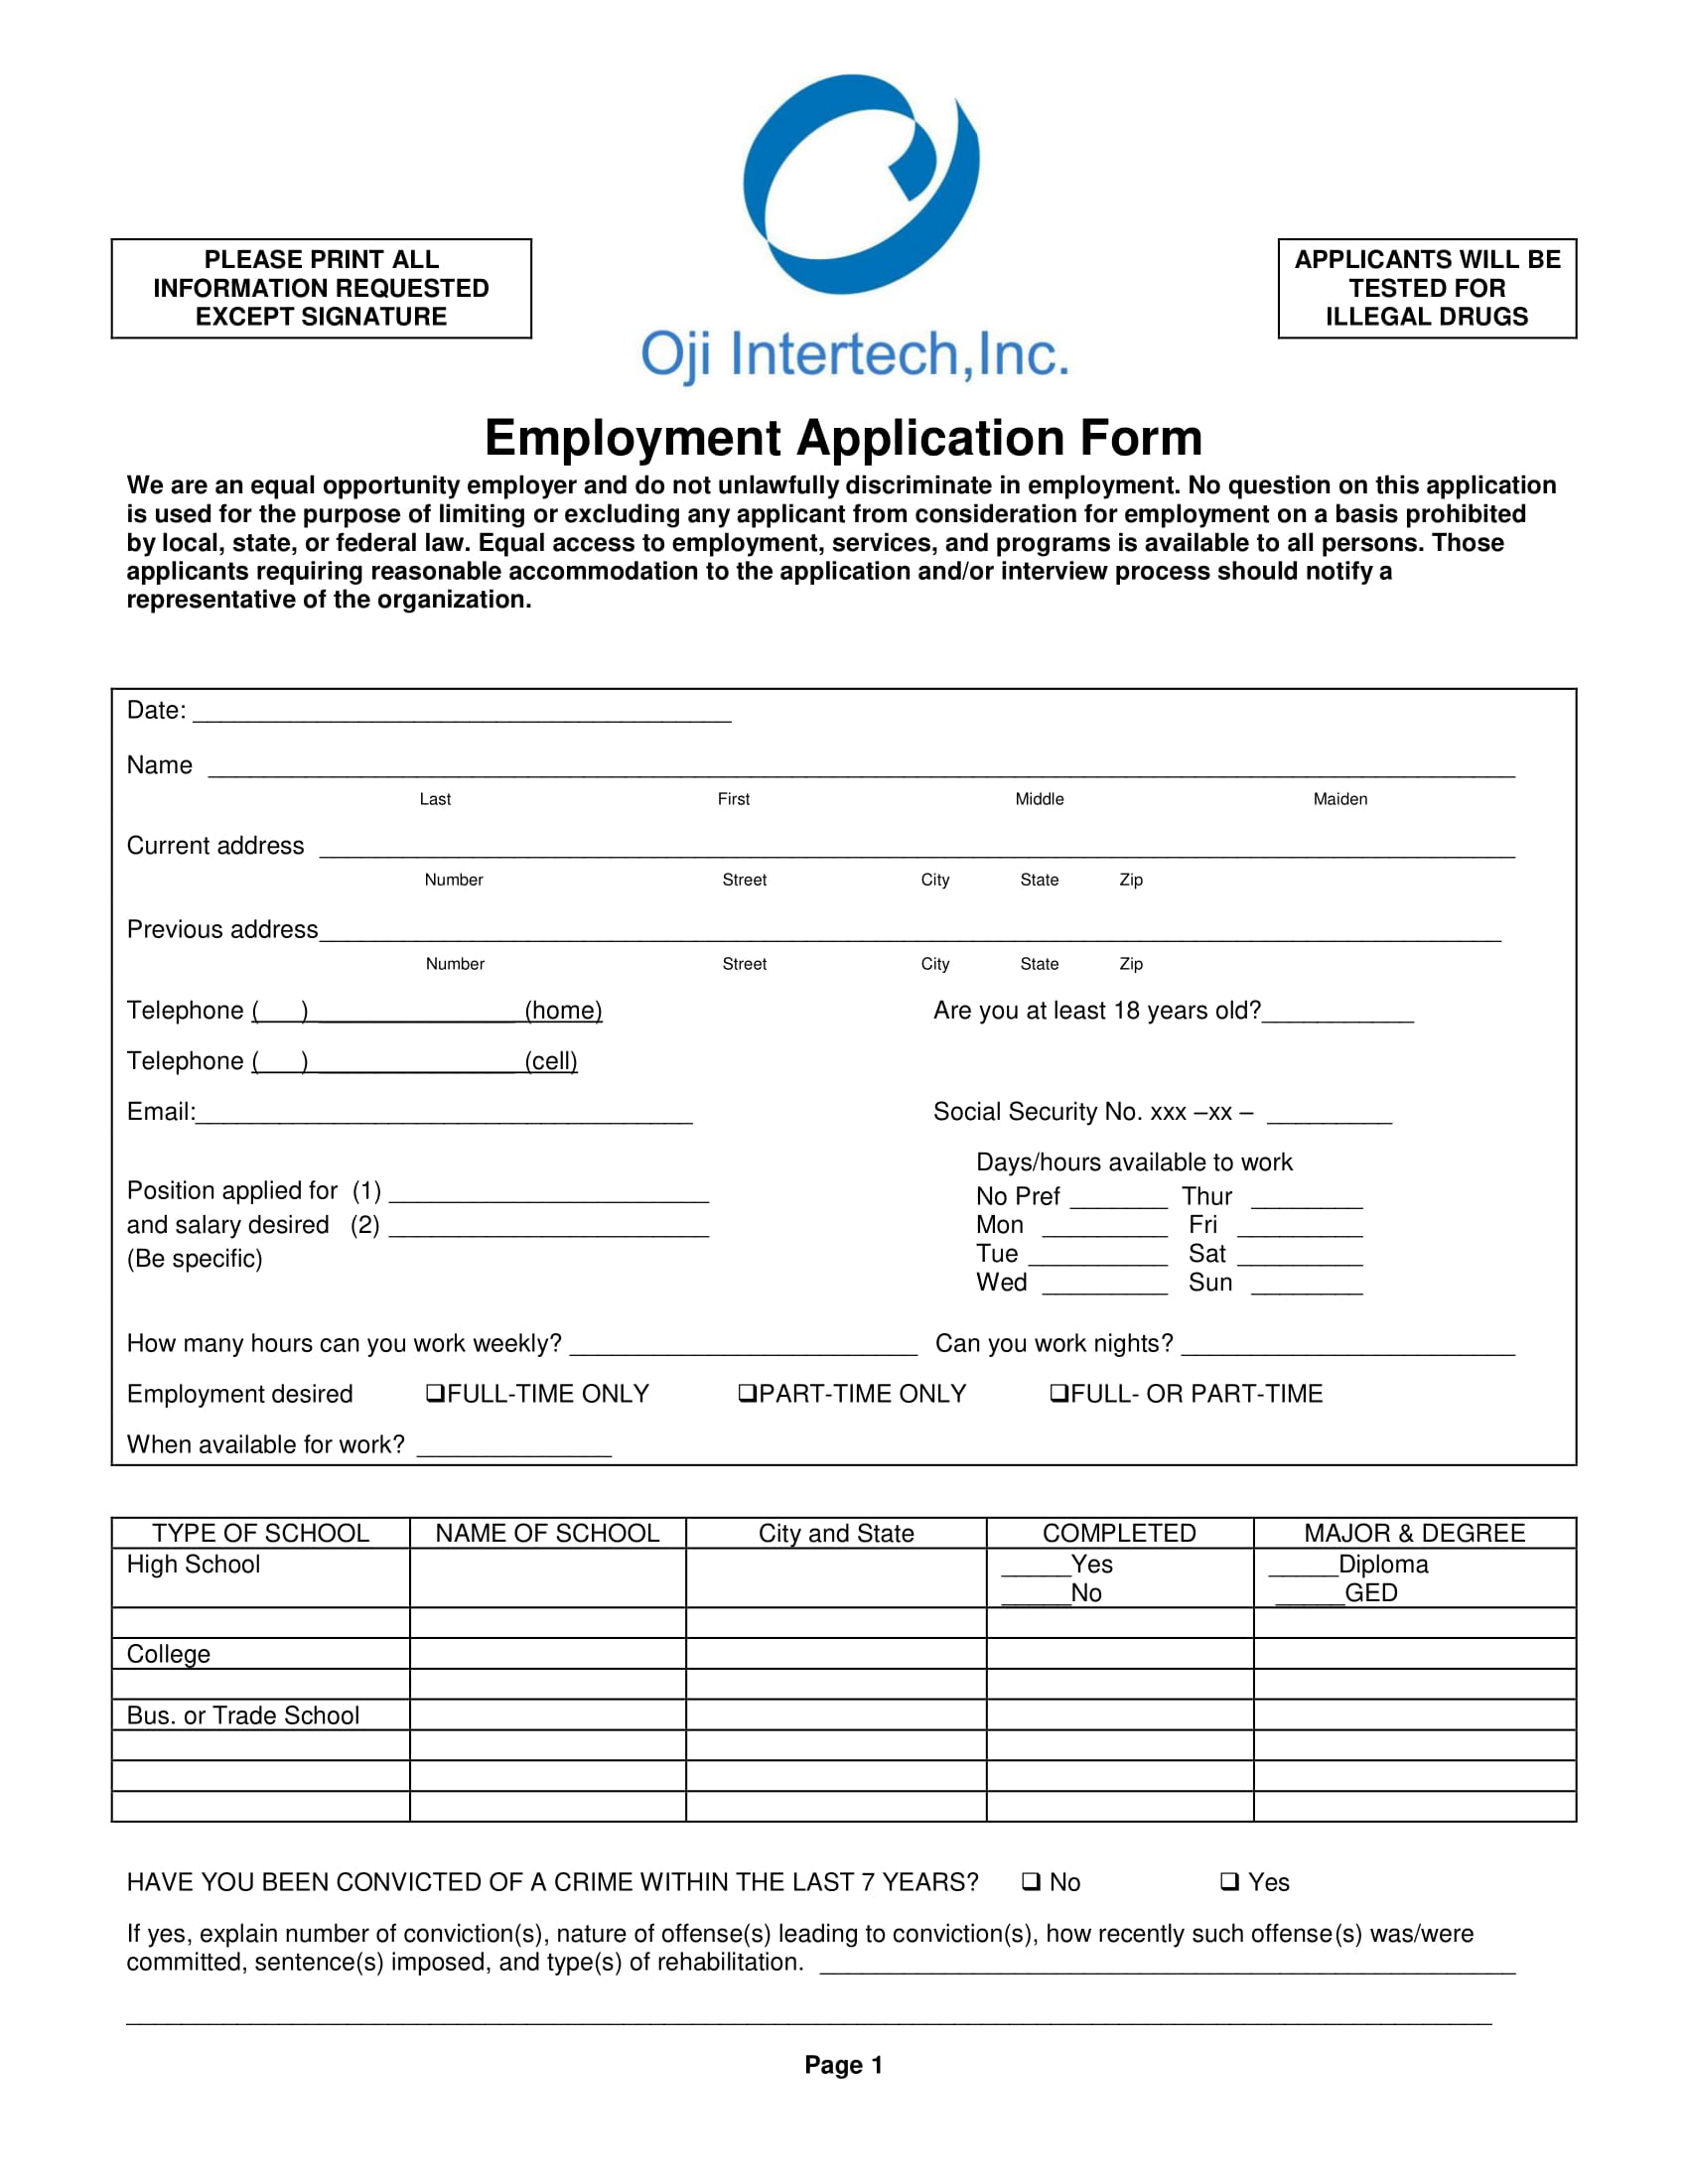 employment-application-form-19-examples-format-pdf-examples